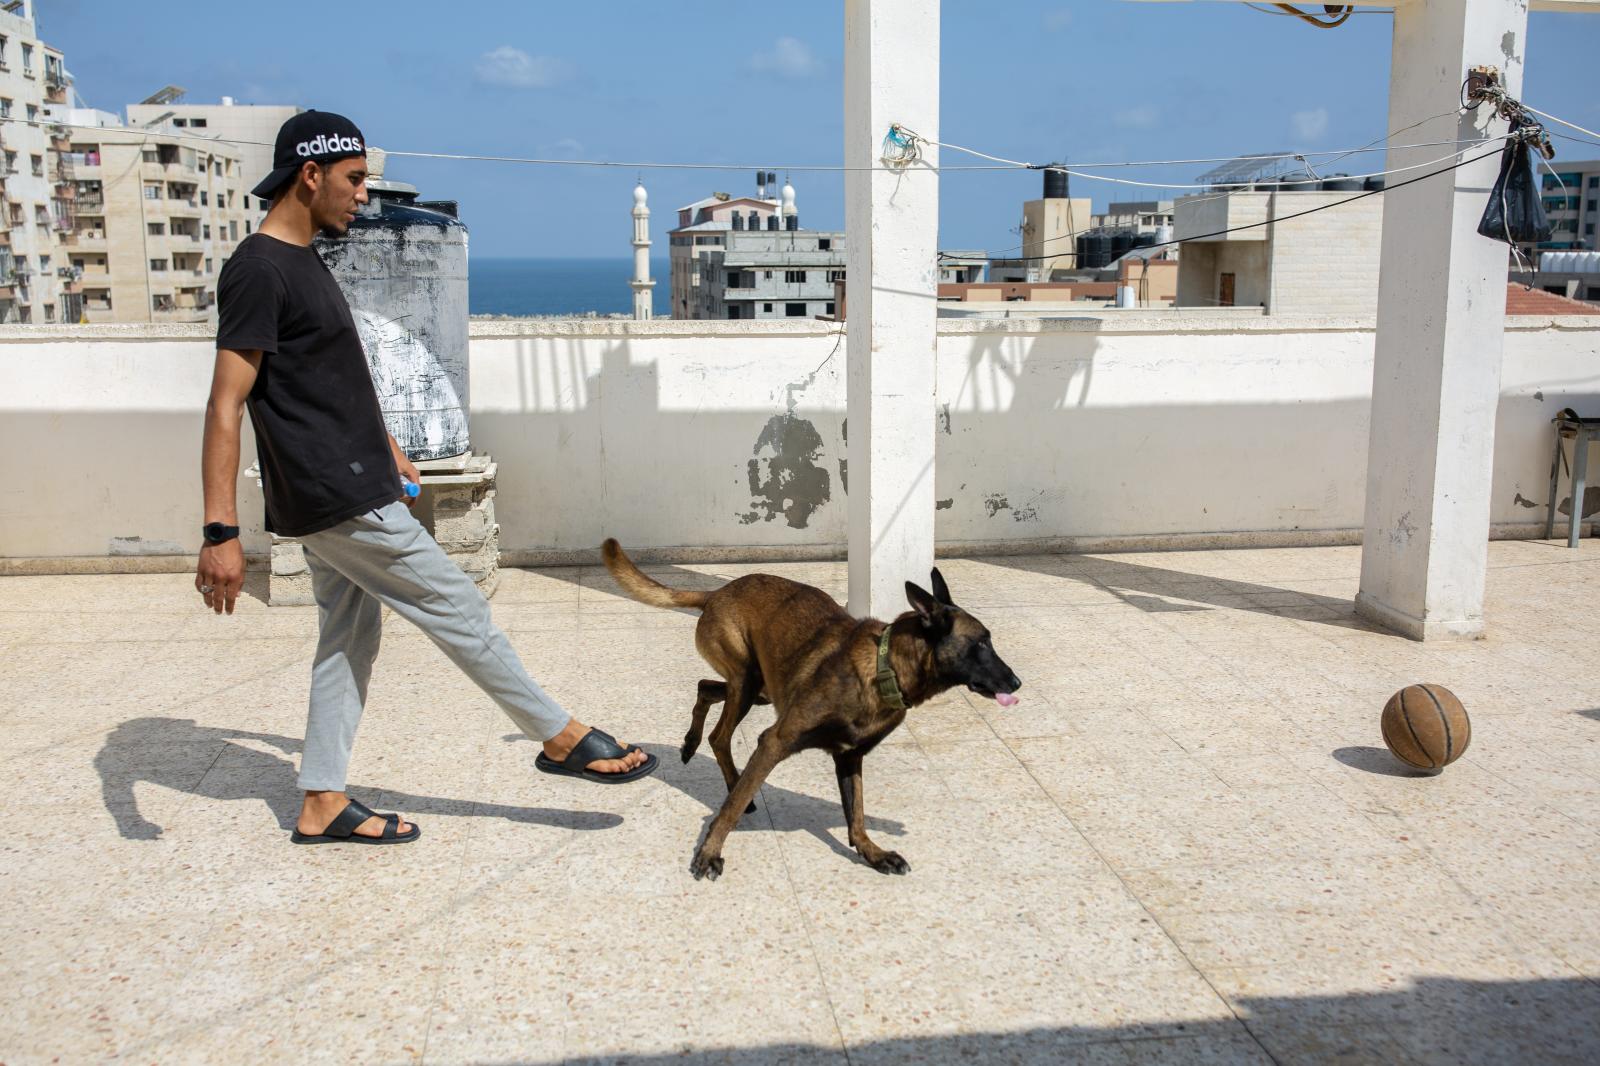 Mohammed and the Belgian Malinois